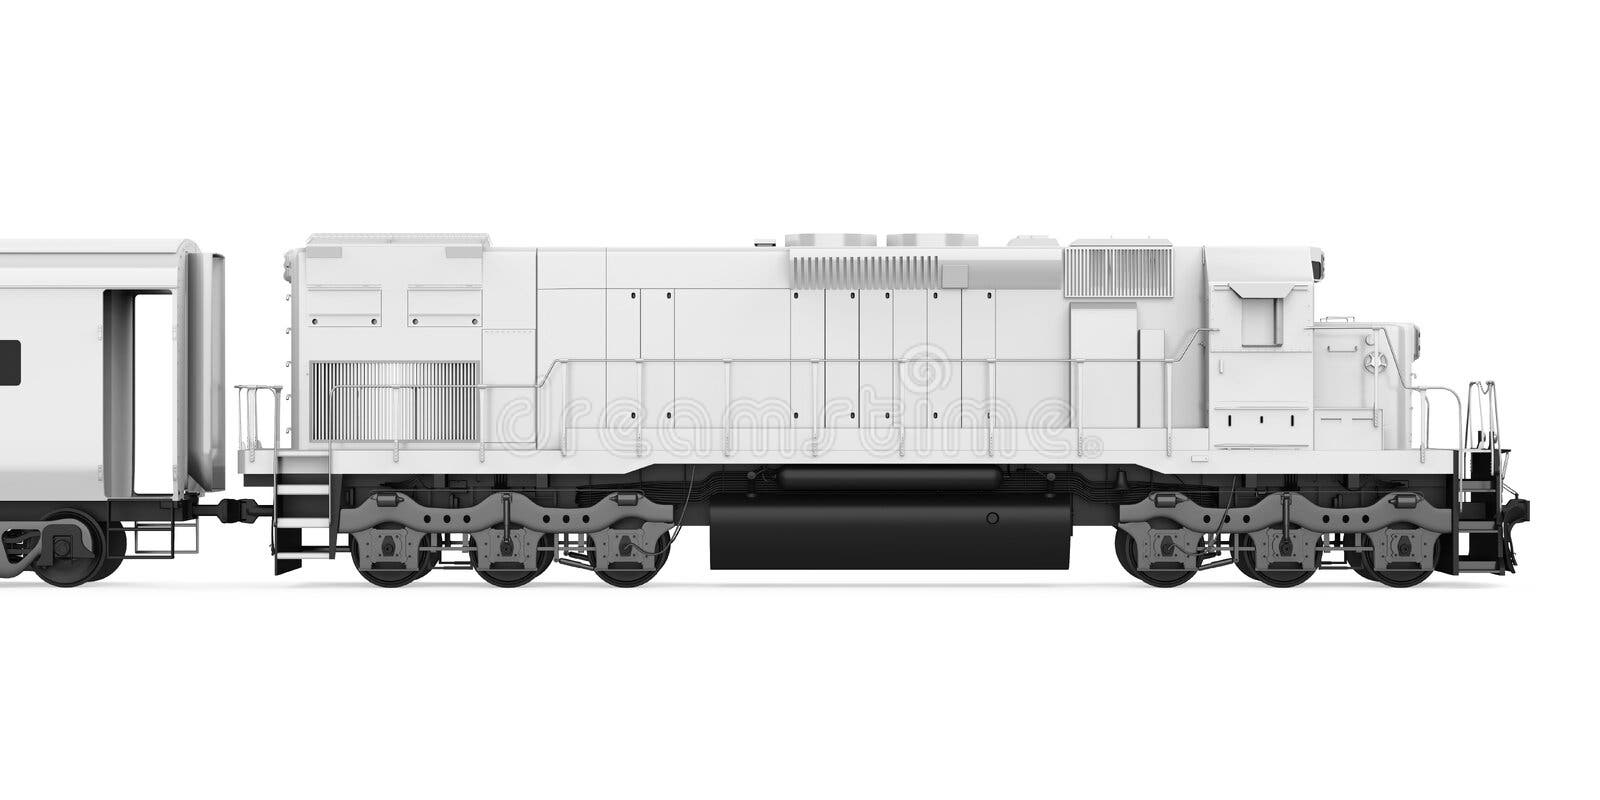 Diesel Locomotive and Tank Car. Side View Stock Photo - Image of ...